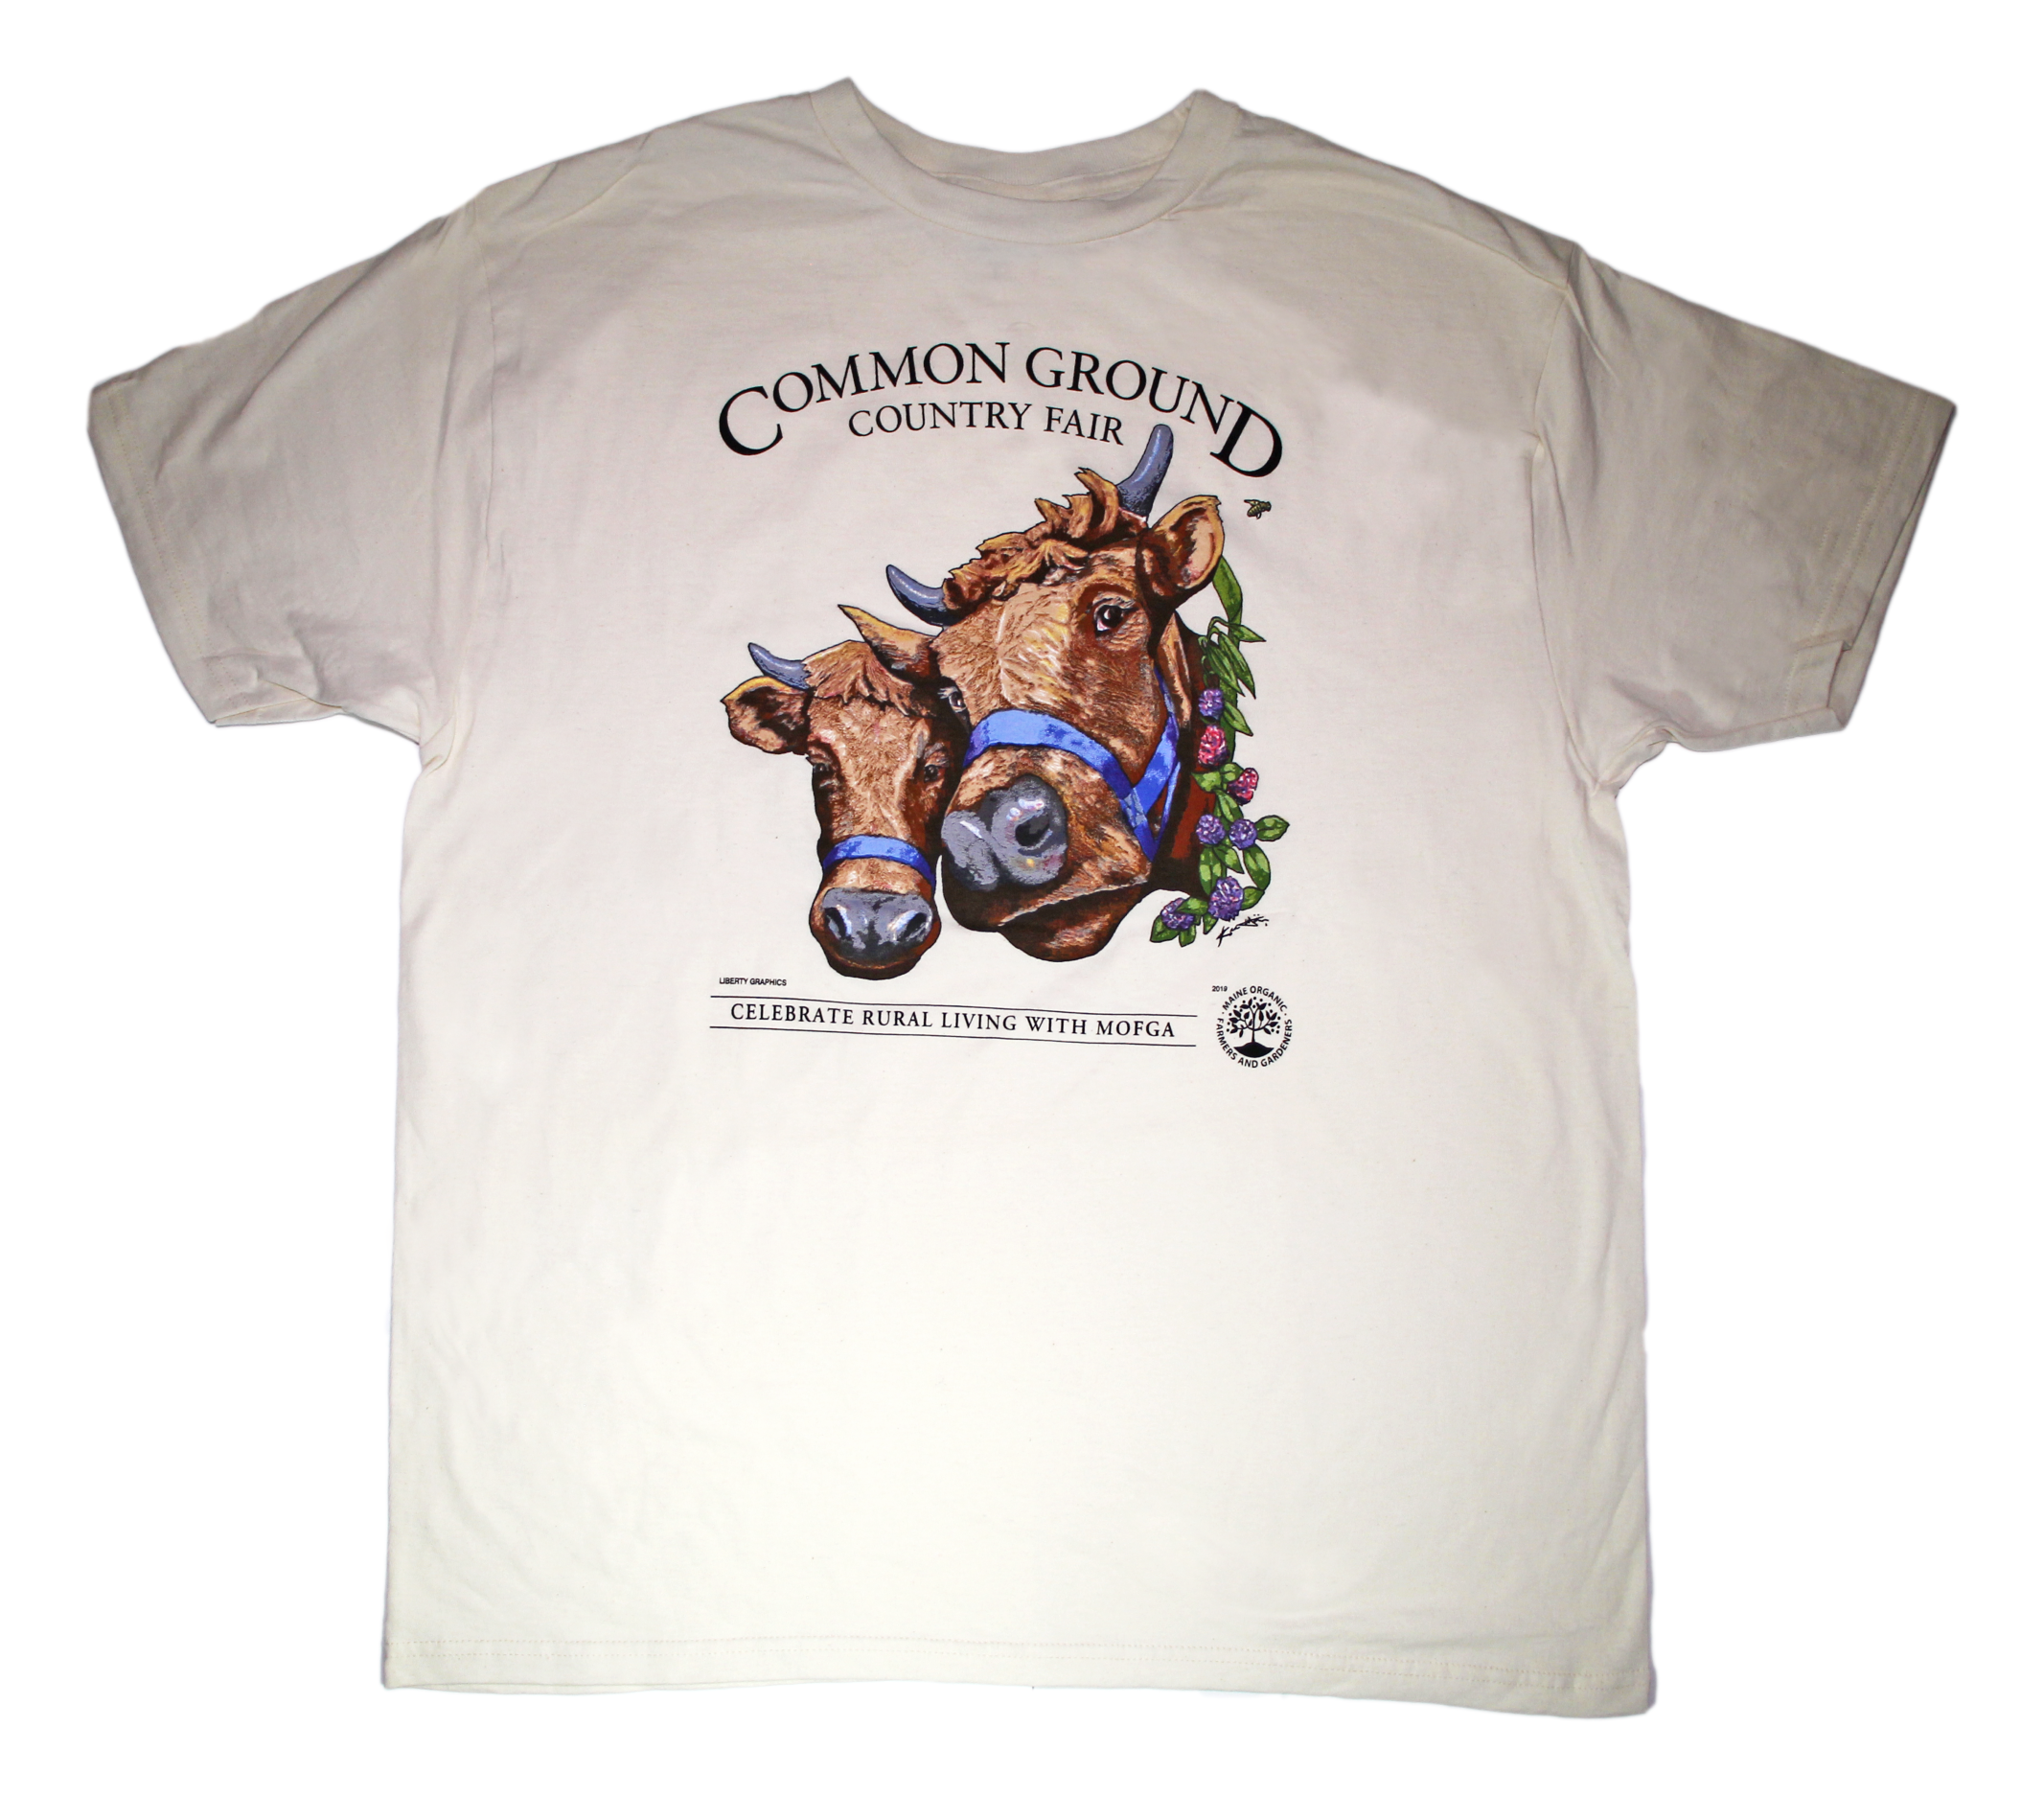 A white shirt with artwork in the center depicting the heads of two shaggy brown cows with horns, wearing blue halters. On the right side of one cow is a viney wreath with small clusters of purple and blush flowers. Black text around art reads “Common Ground Country Fair '' and  “Celebrate Rural Living with MOFGA”. A black MOFGA logo is in the bottom right corner. 